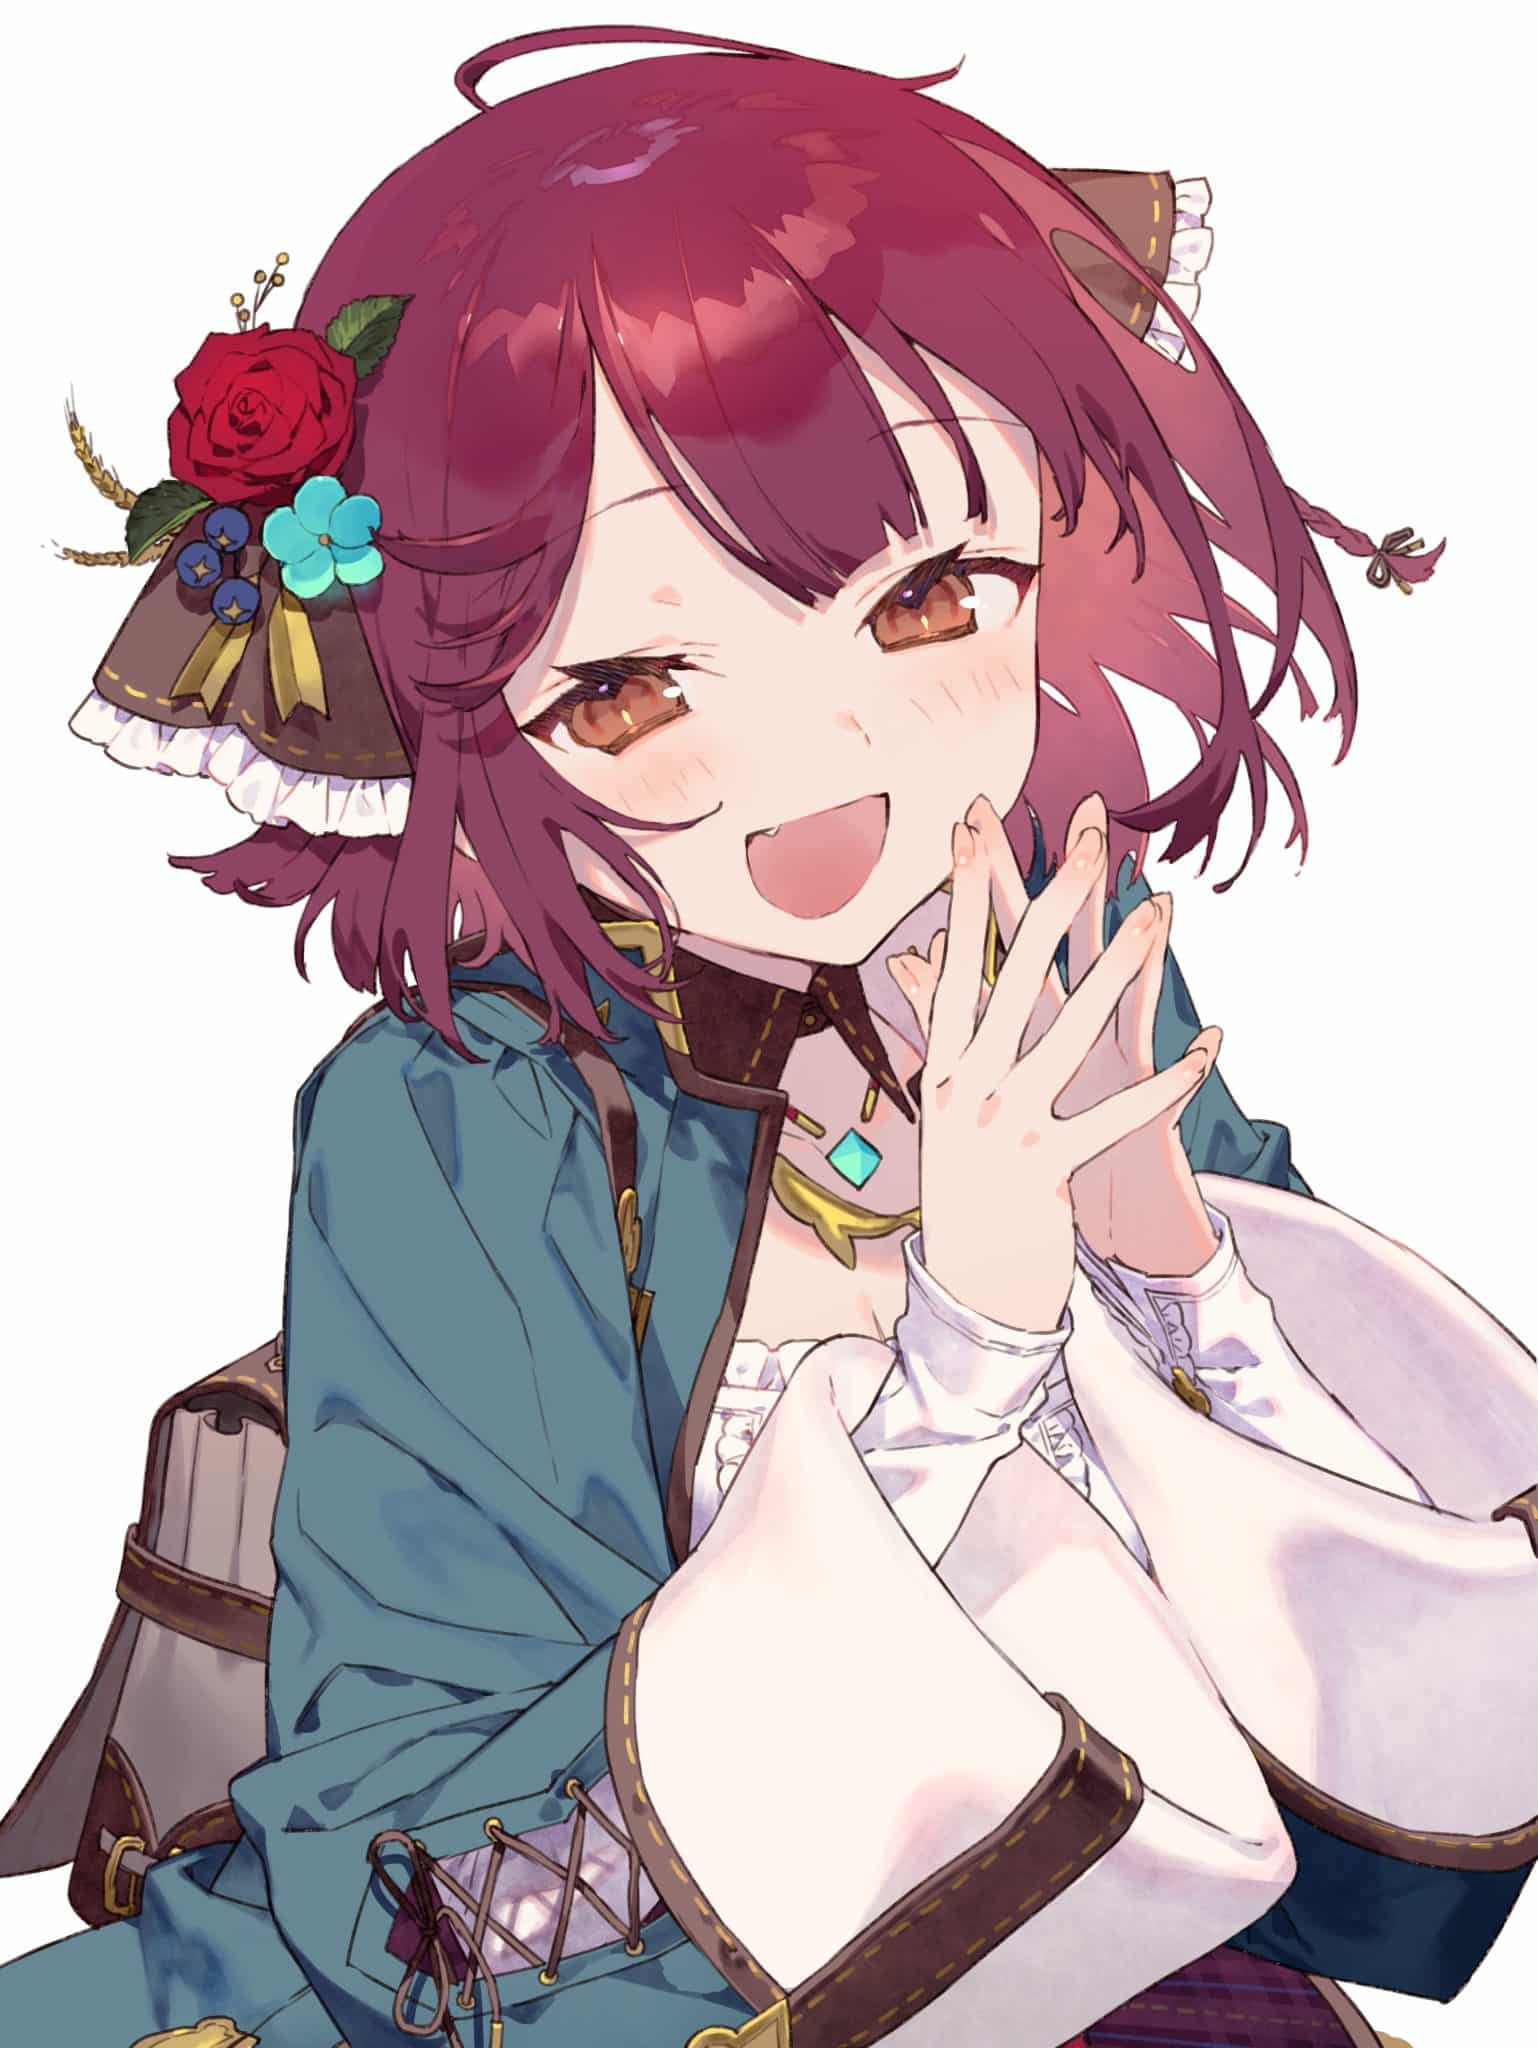 Atelier Sophie 2: The Alchemist of the Mysterious Dream Shares 1-Year Anniversary Art